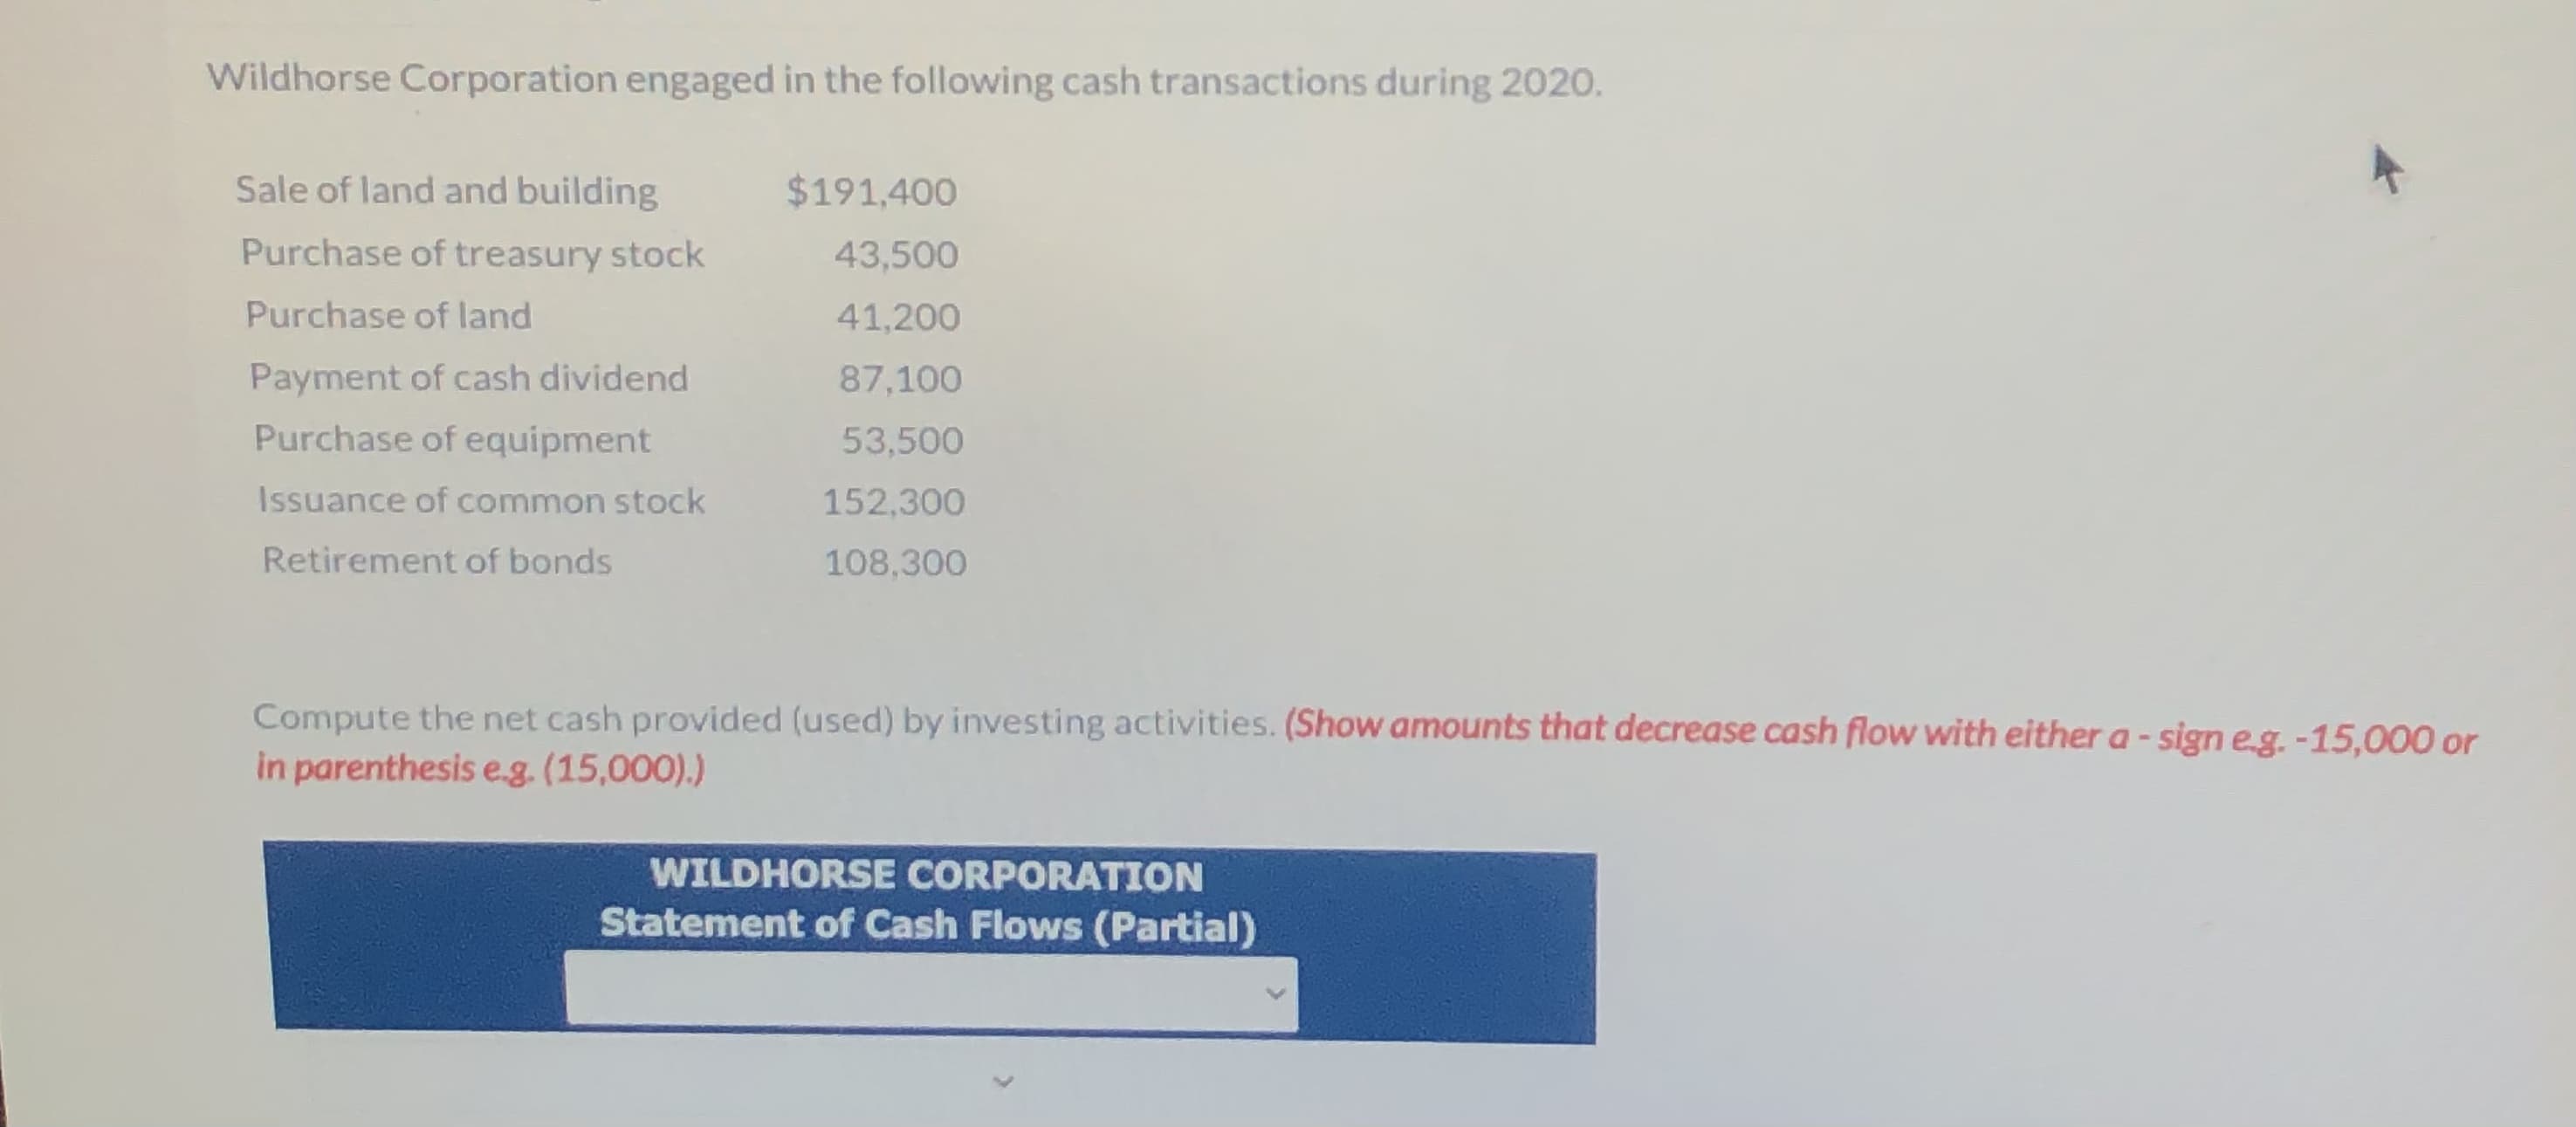 Wildhorse Corporation engaged in the following cash transactions during 2020.
Sale of land and building
$191,400
Purchase of treasury stock
43,500
Purchase of land
41,200
Payment of cash dividend
87,100
Purchase of equipment
53,500
Issuance of common stock
152,300
Retirement of bonds
108,300
Compute the net cash provided (used) by investing activities. (Show amounts that decrease cash flow with either a - sign eg. -15,000 or
in parenthesis eg. (15,000).)
WILDHORSE CORPORATION
Statement of Cash Flows (Partial)
